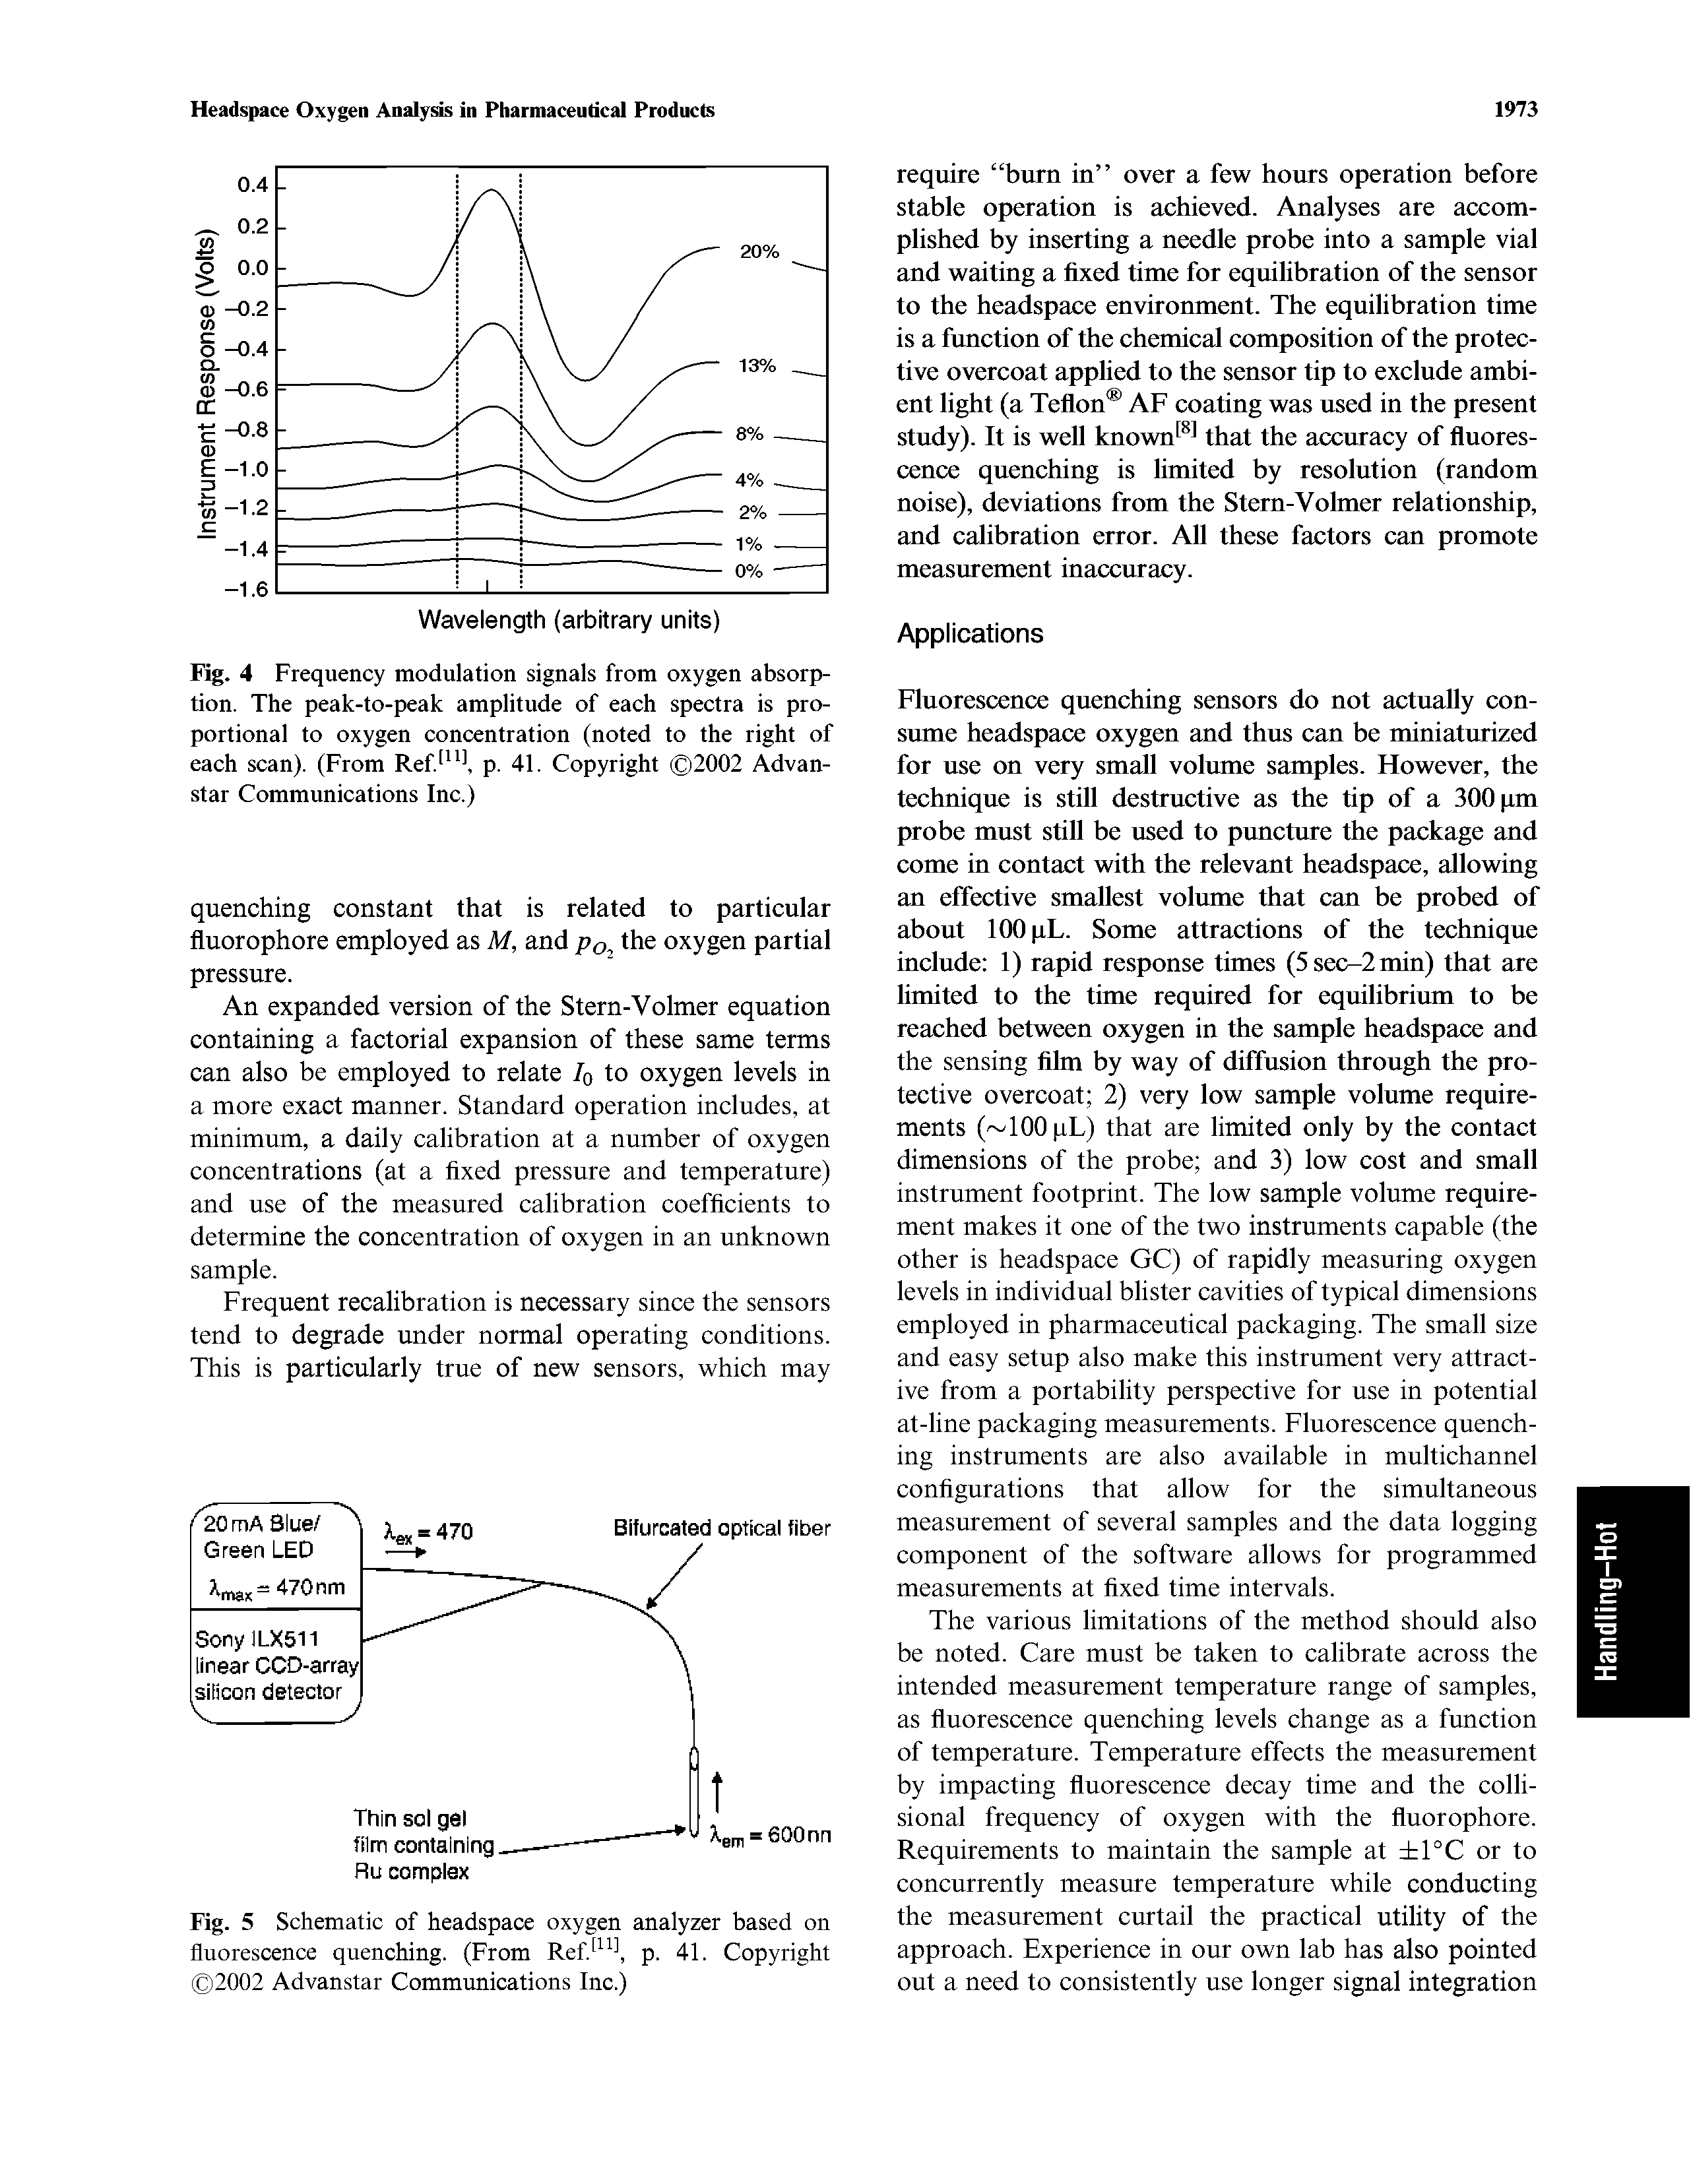 Fig. 5 Schematic of headspace oxygen analyzer based on fluorescence quenching. (From Ref. p. 41. Copyright 2002 Advanstar Communications Inc.)...